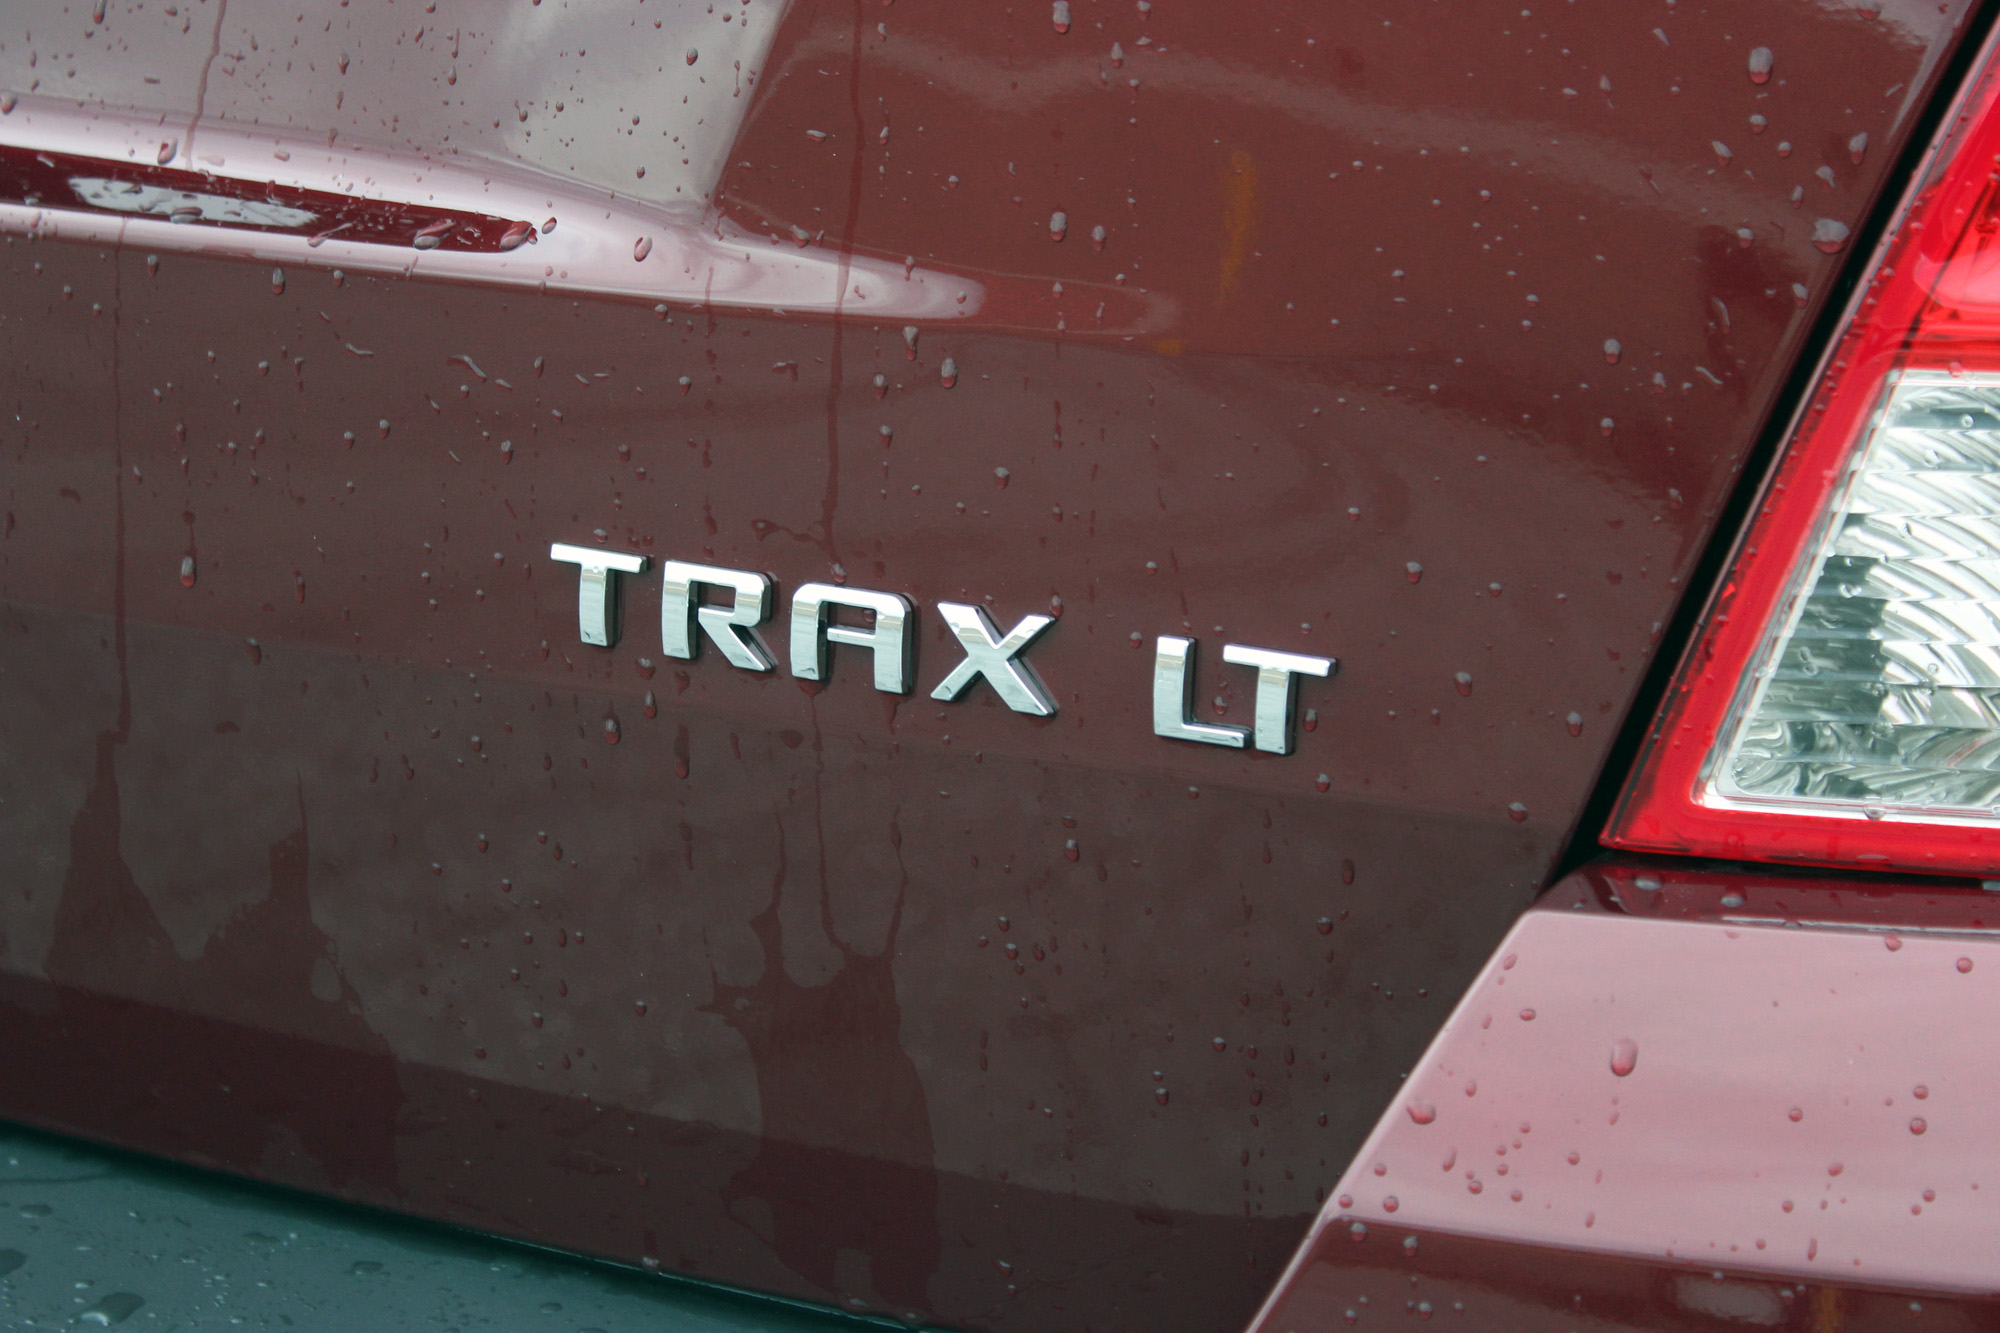 2016 Chevrolet Trax Review